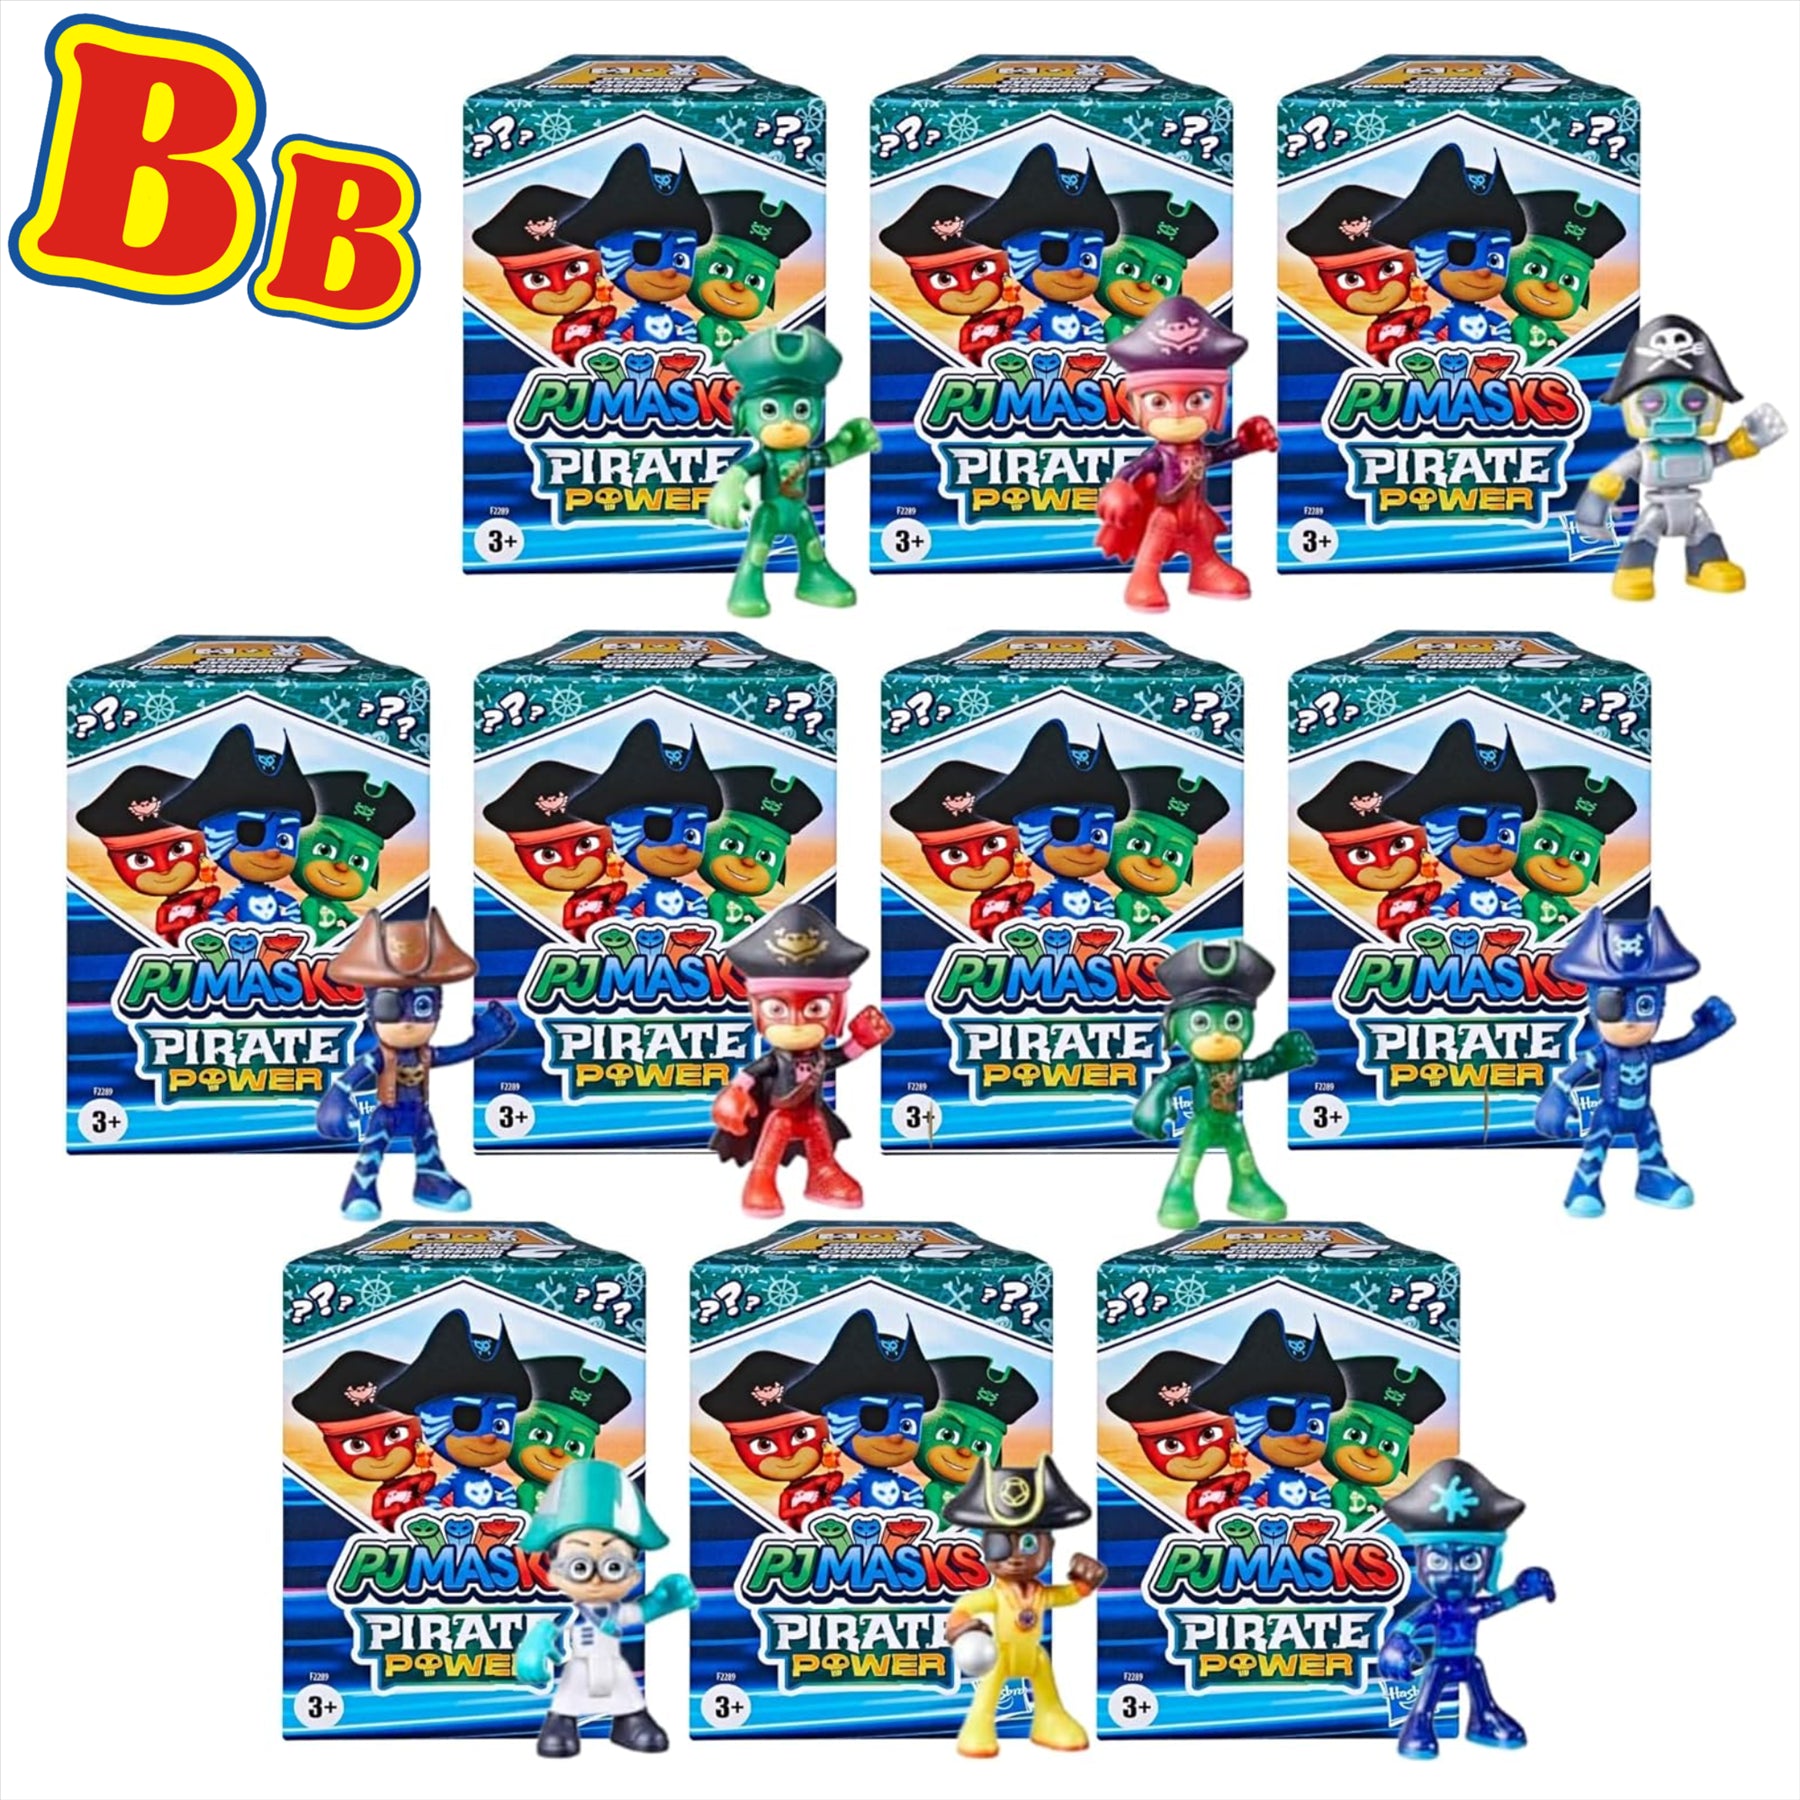 PJ Masks Pirate Power Articulated Play Figures Blind Box Sets - Complete Set of 10 - Toptoys2u